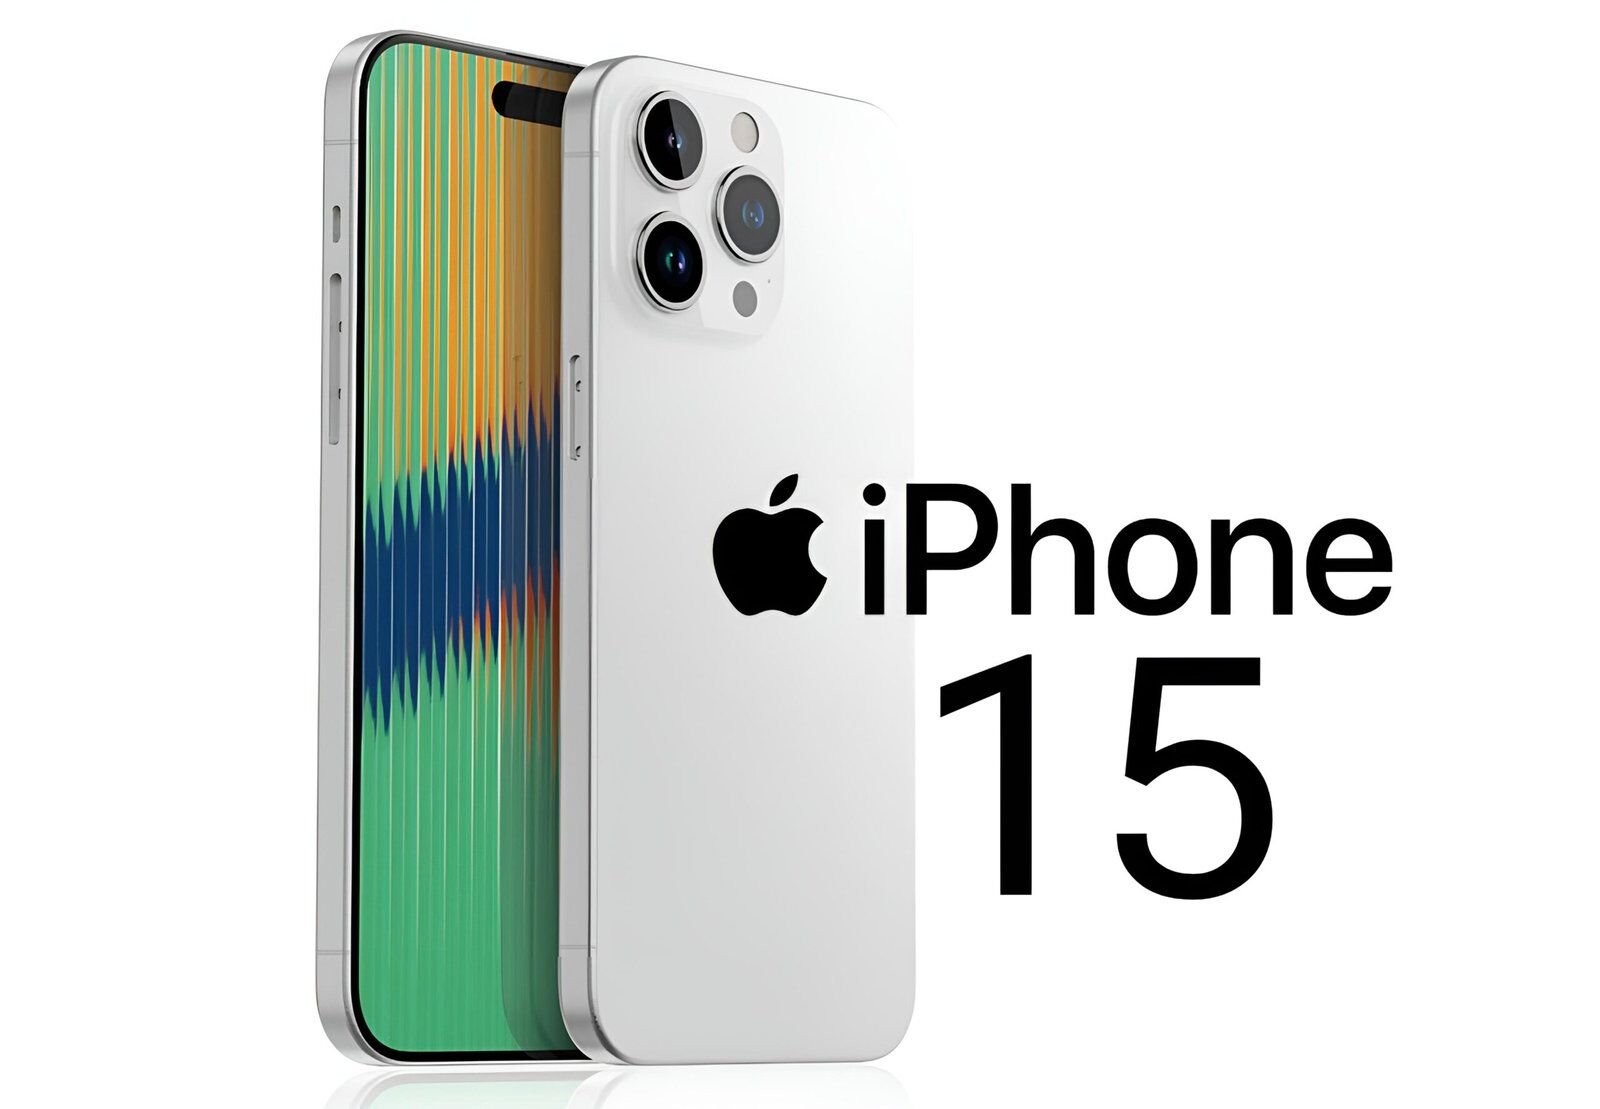 iPhone 15 dtecheducate